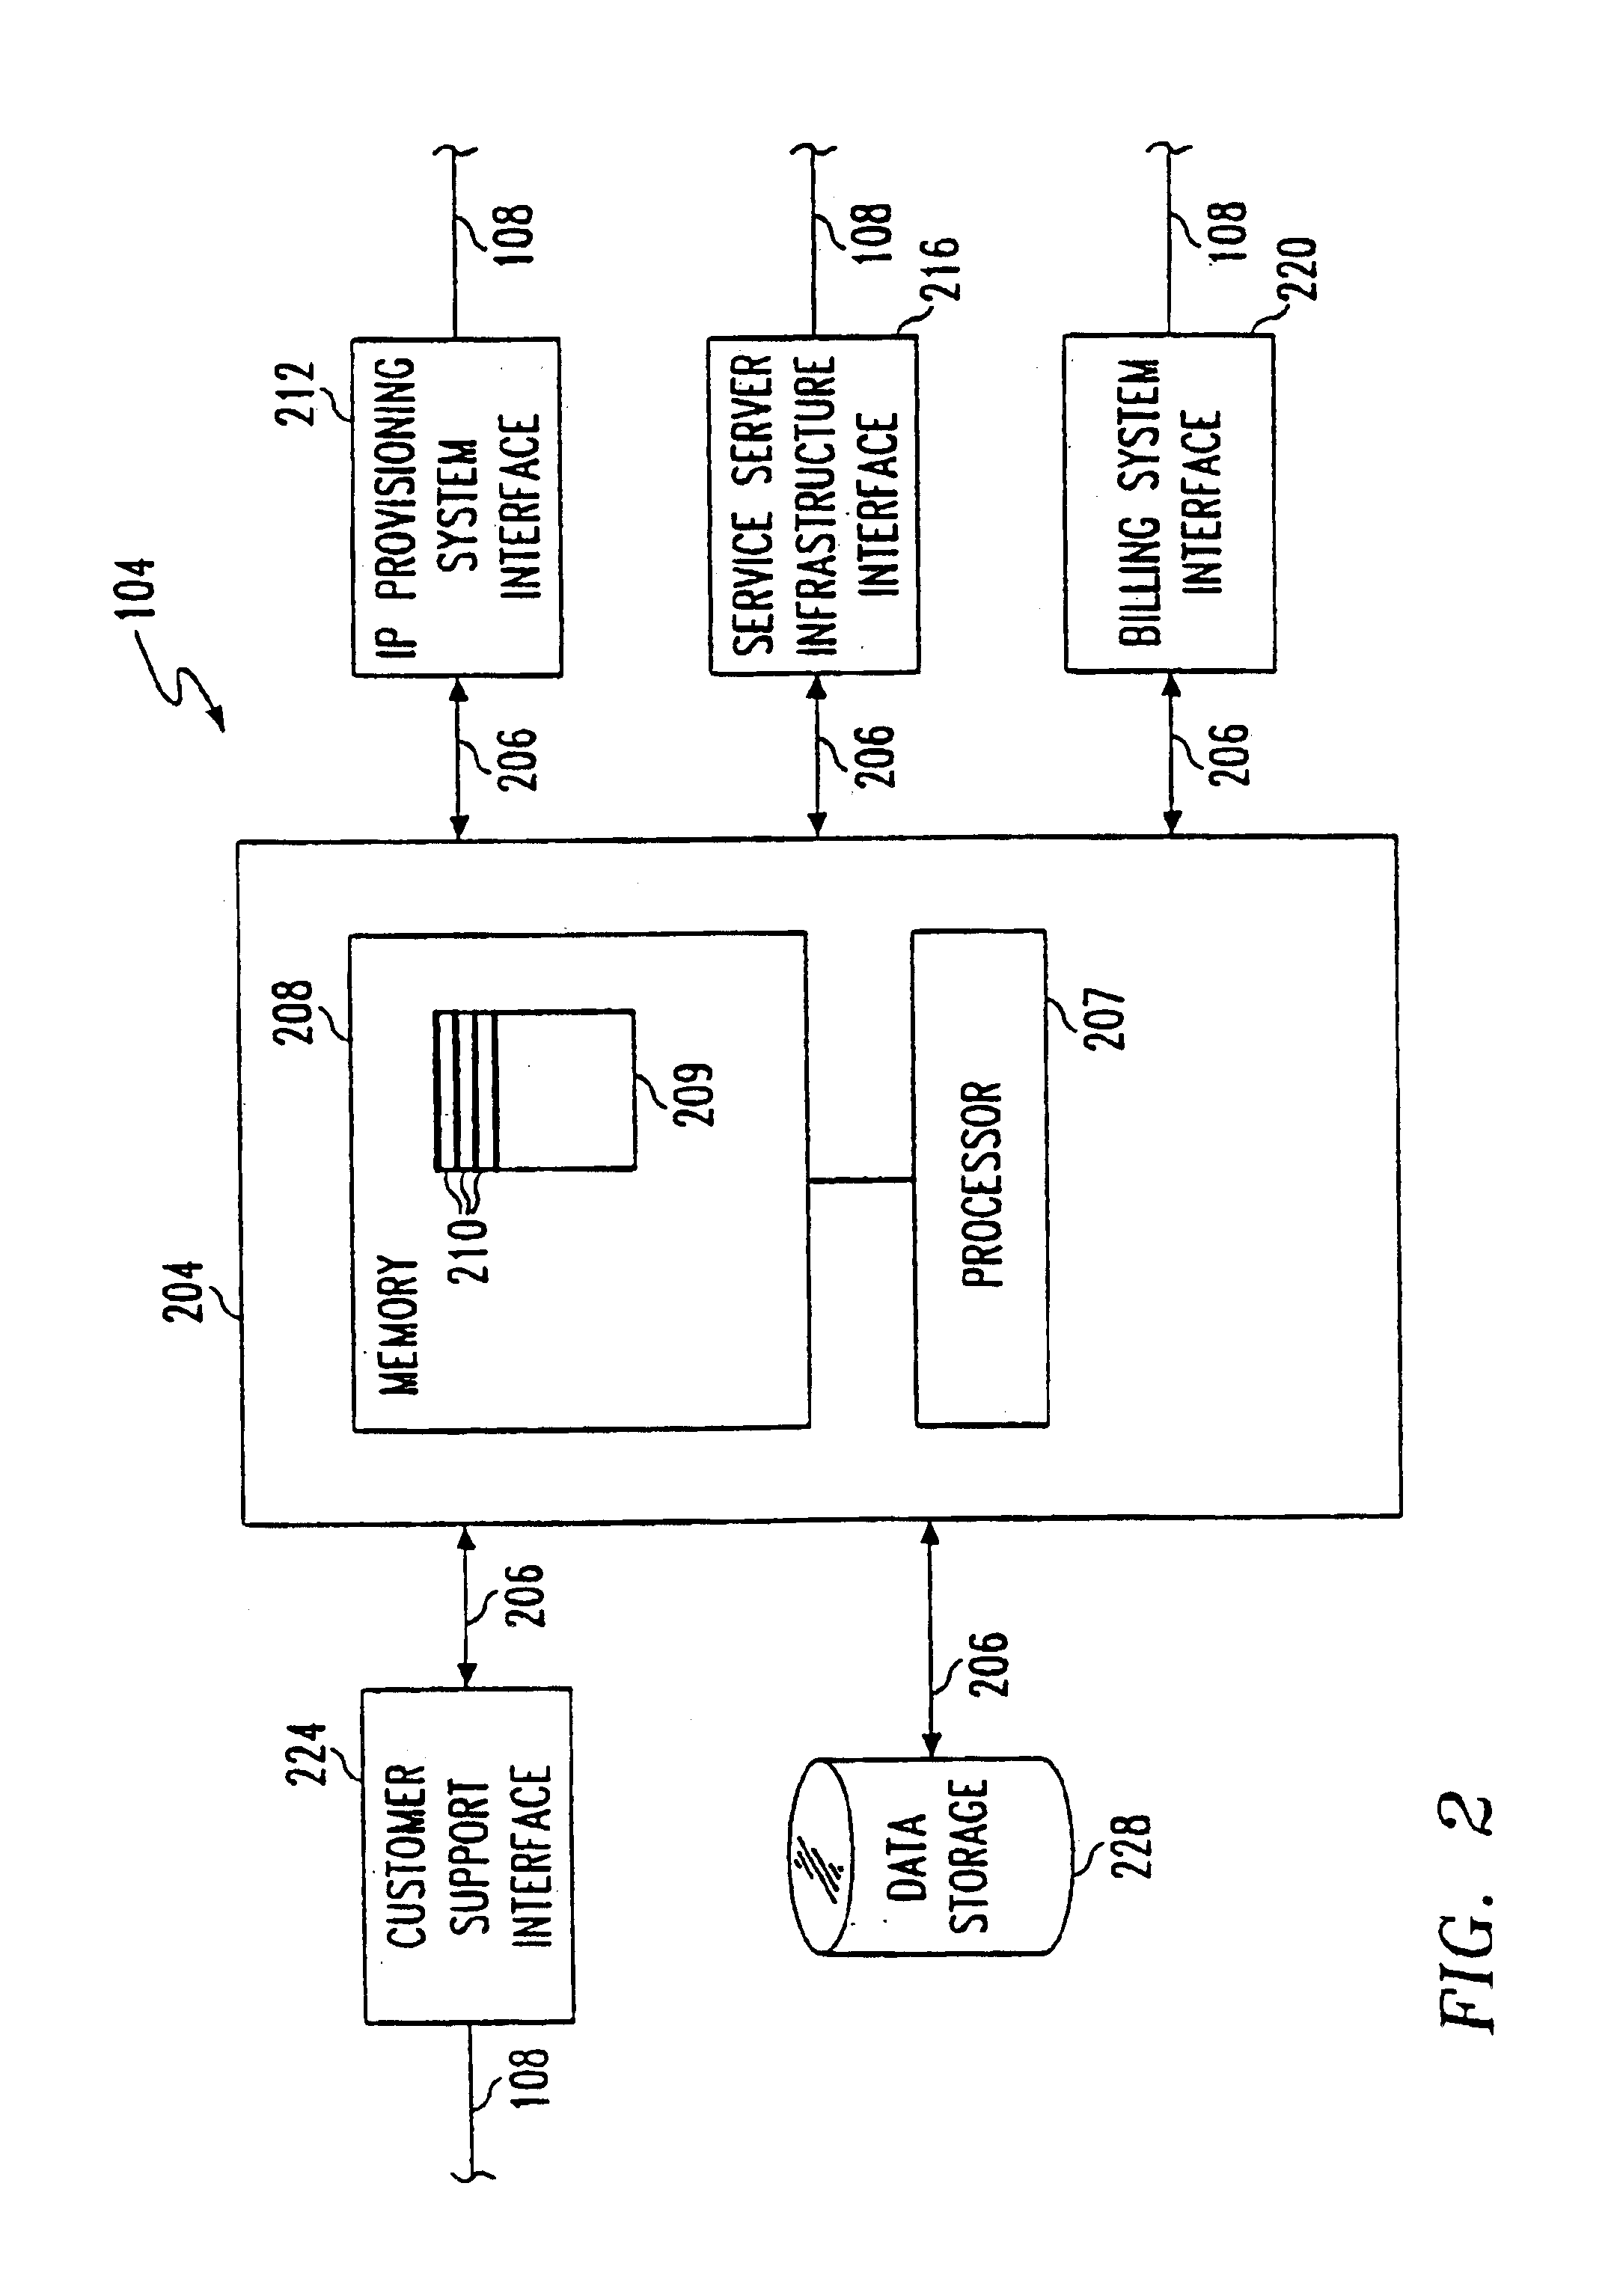 Method and apparatus for managing the provisioning of client devices connected to an interactive TV network